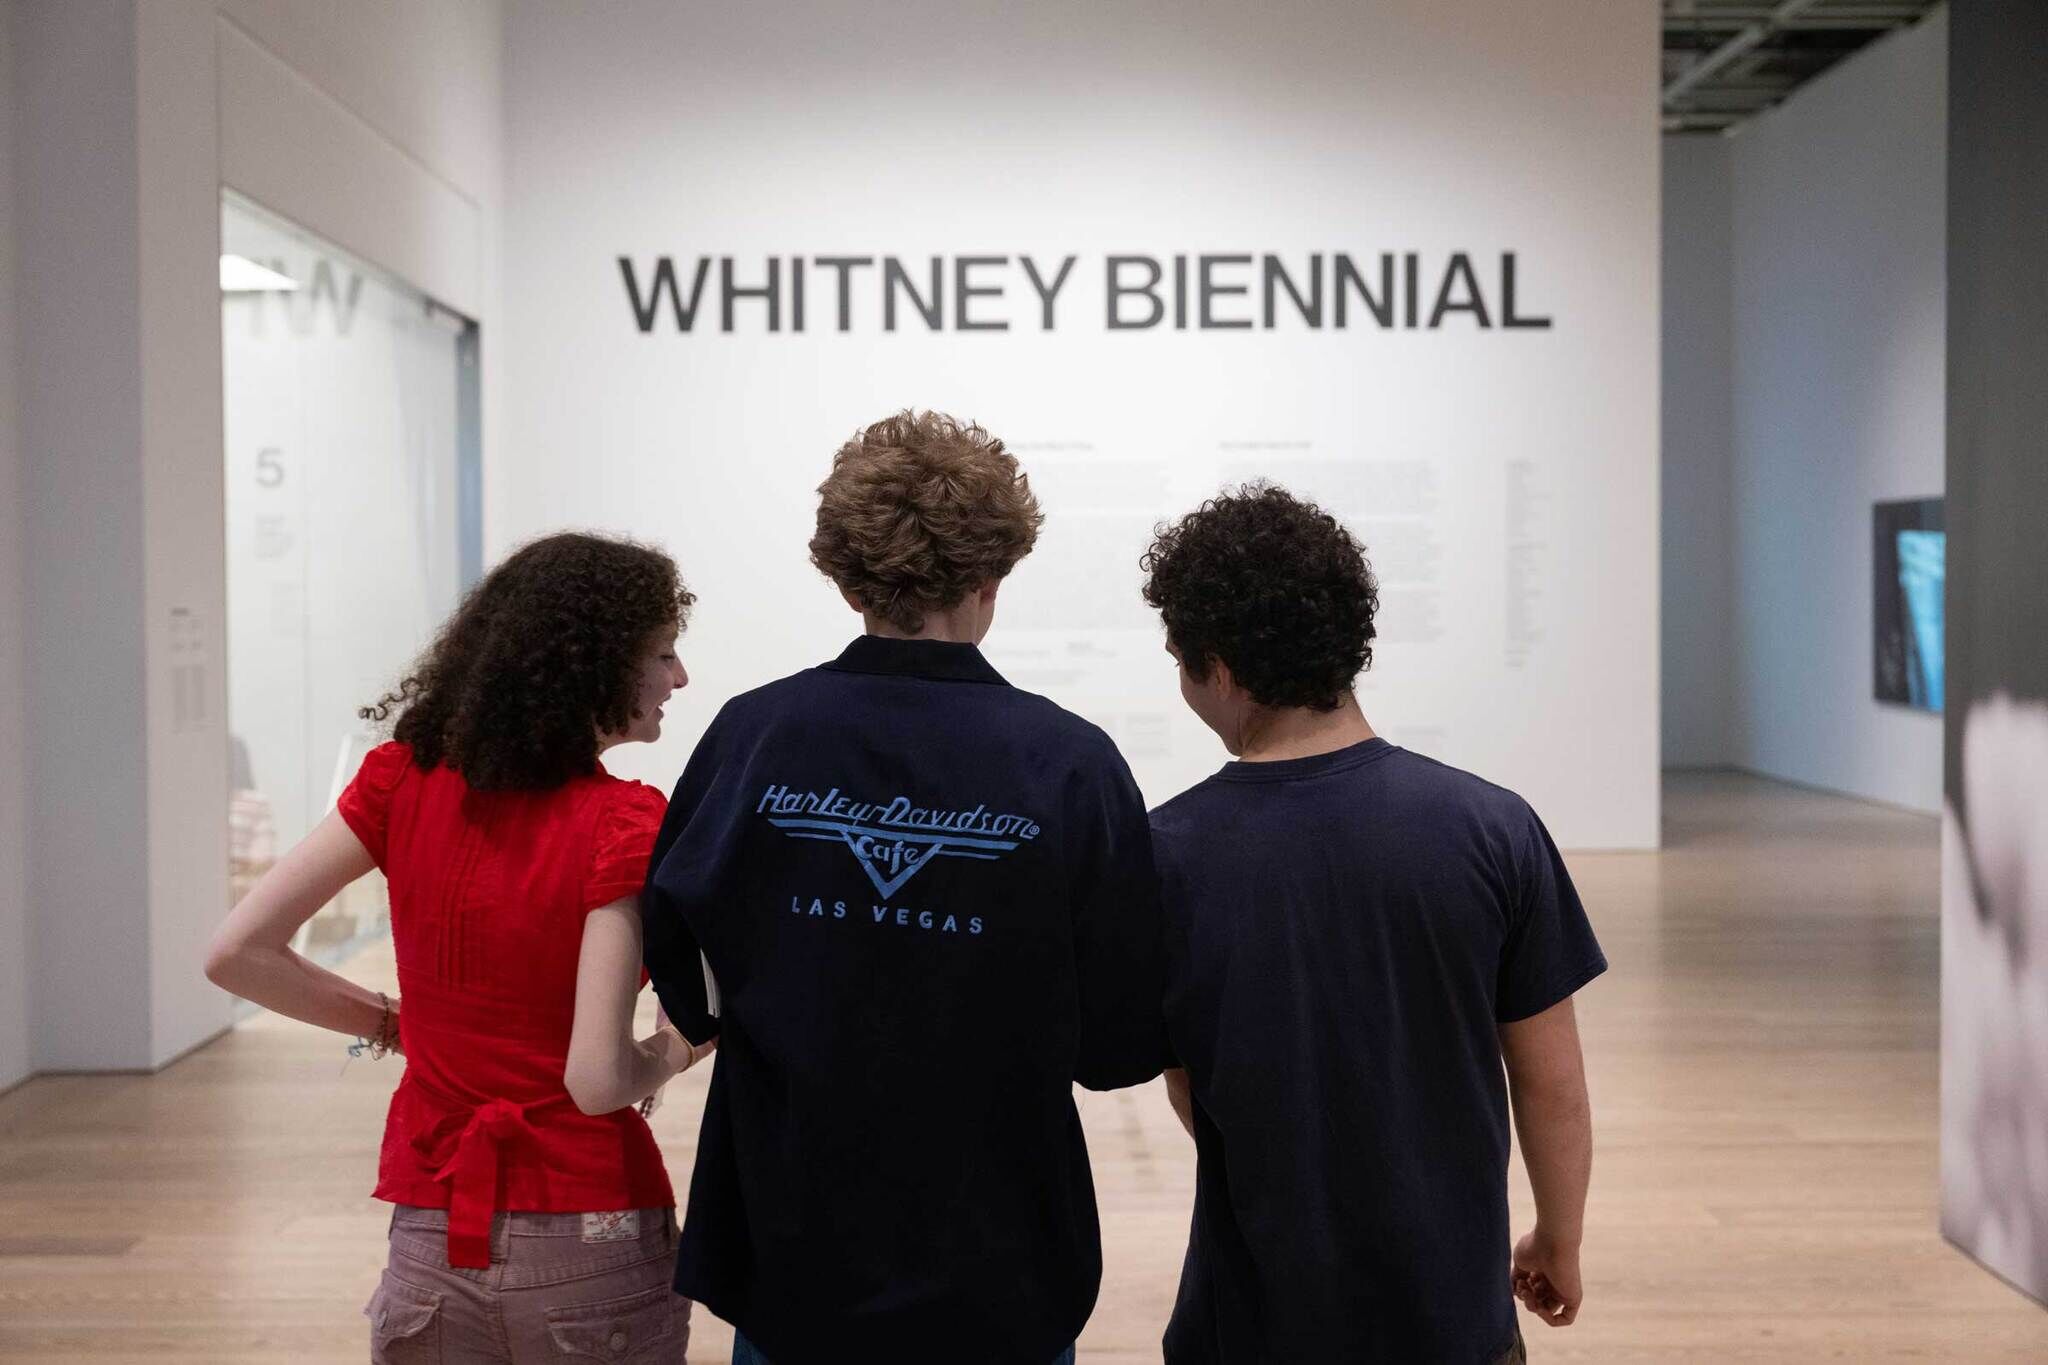 Three people stand in front of a wall with "Whitney Biennial" written on it, viewed from behind. One wears a red shirt, another a Harley-Davidson jacket.